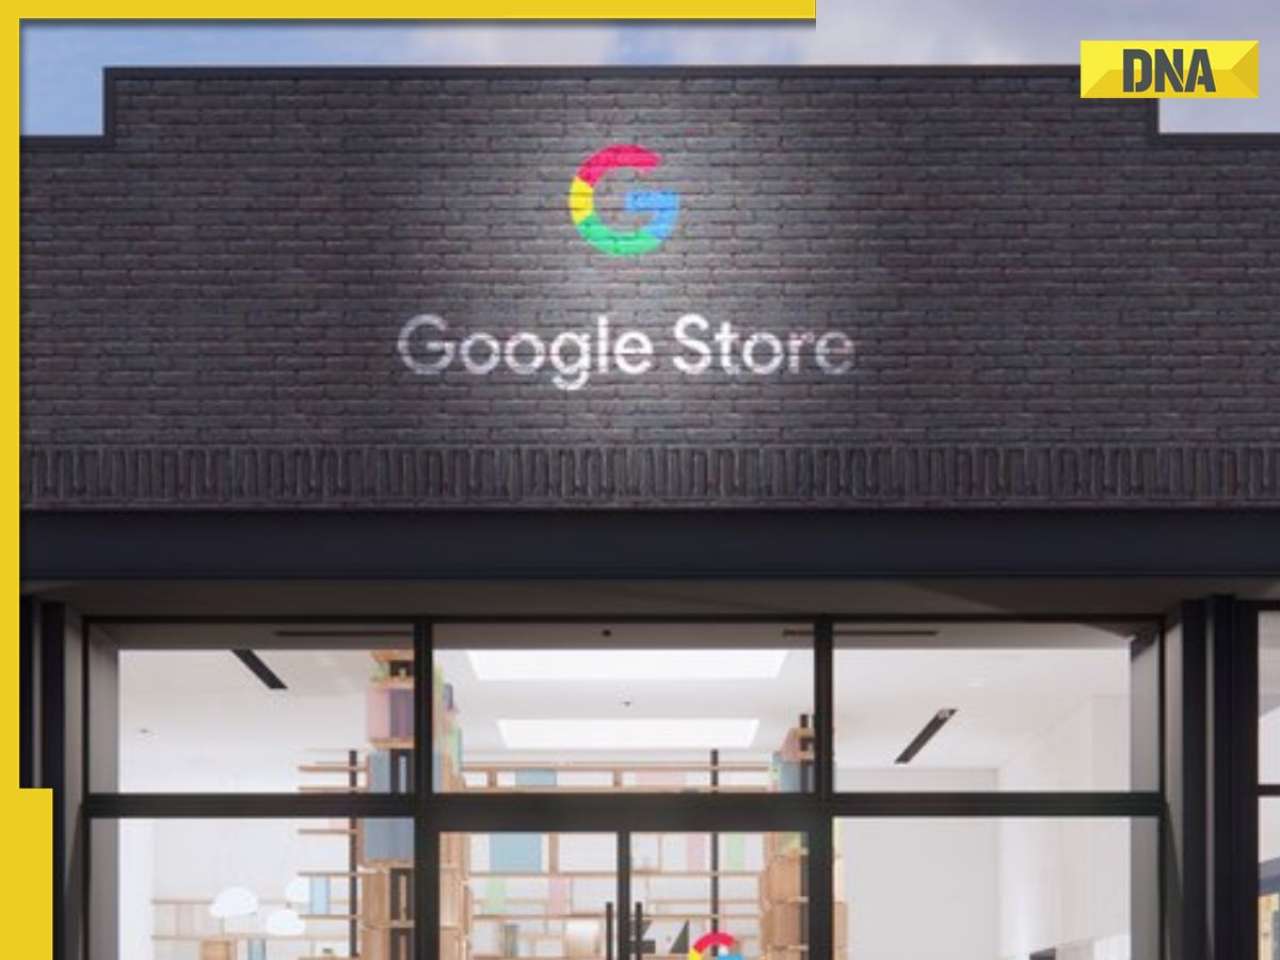 After Apple, Google may soon launch its first official retail store in India, to sell Google Pixel…